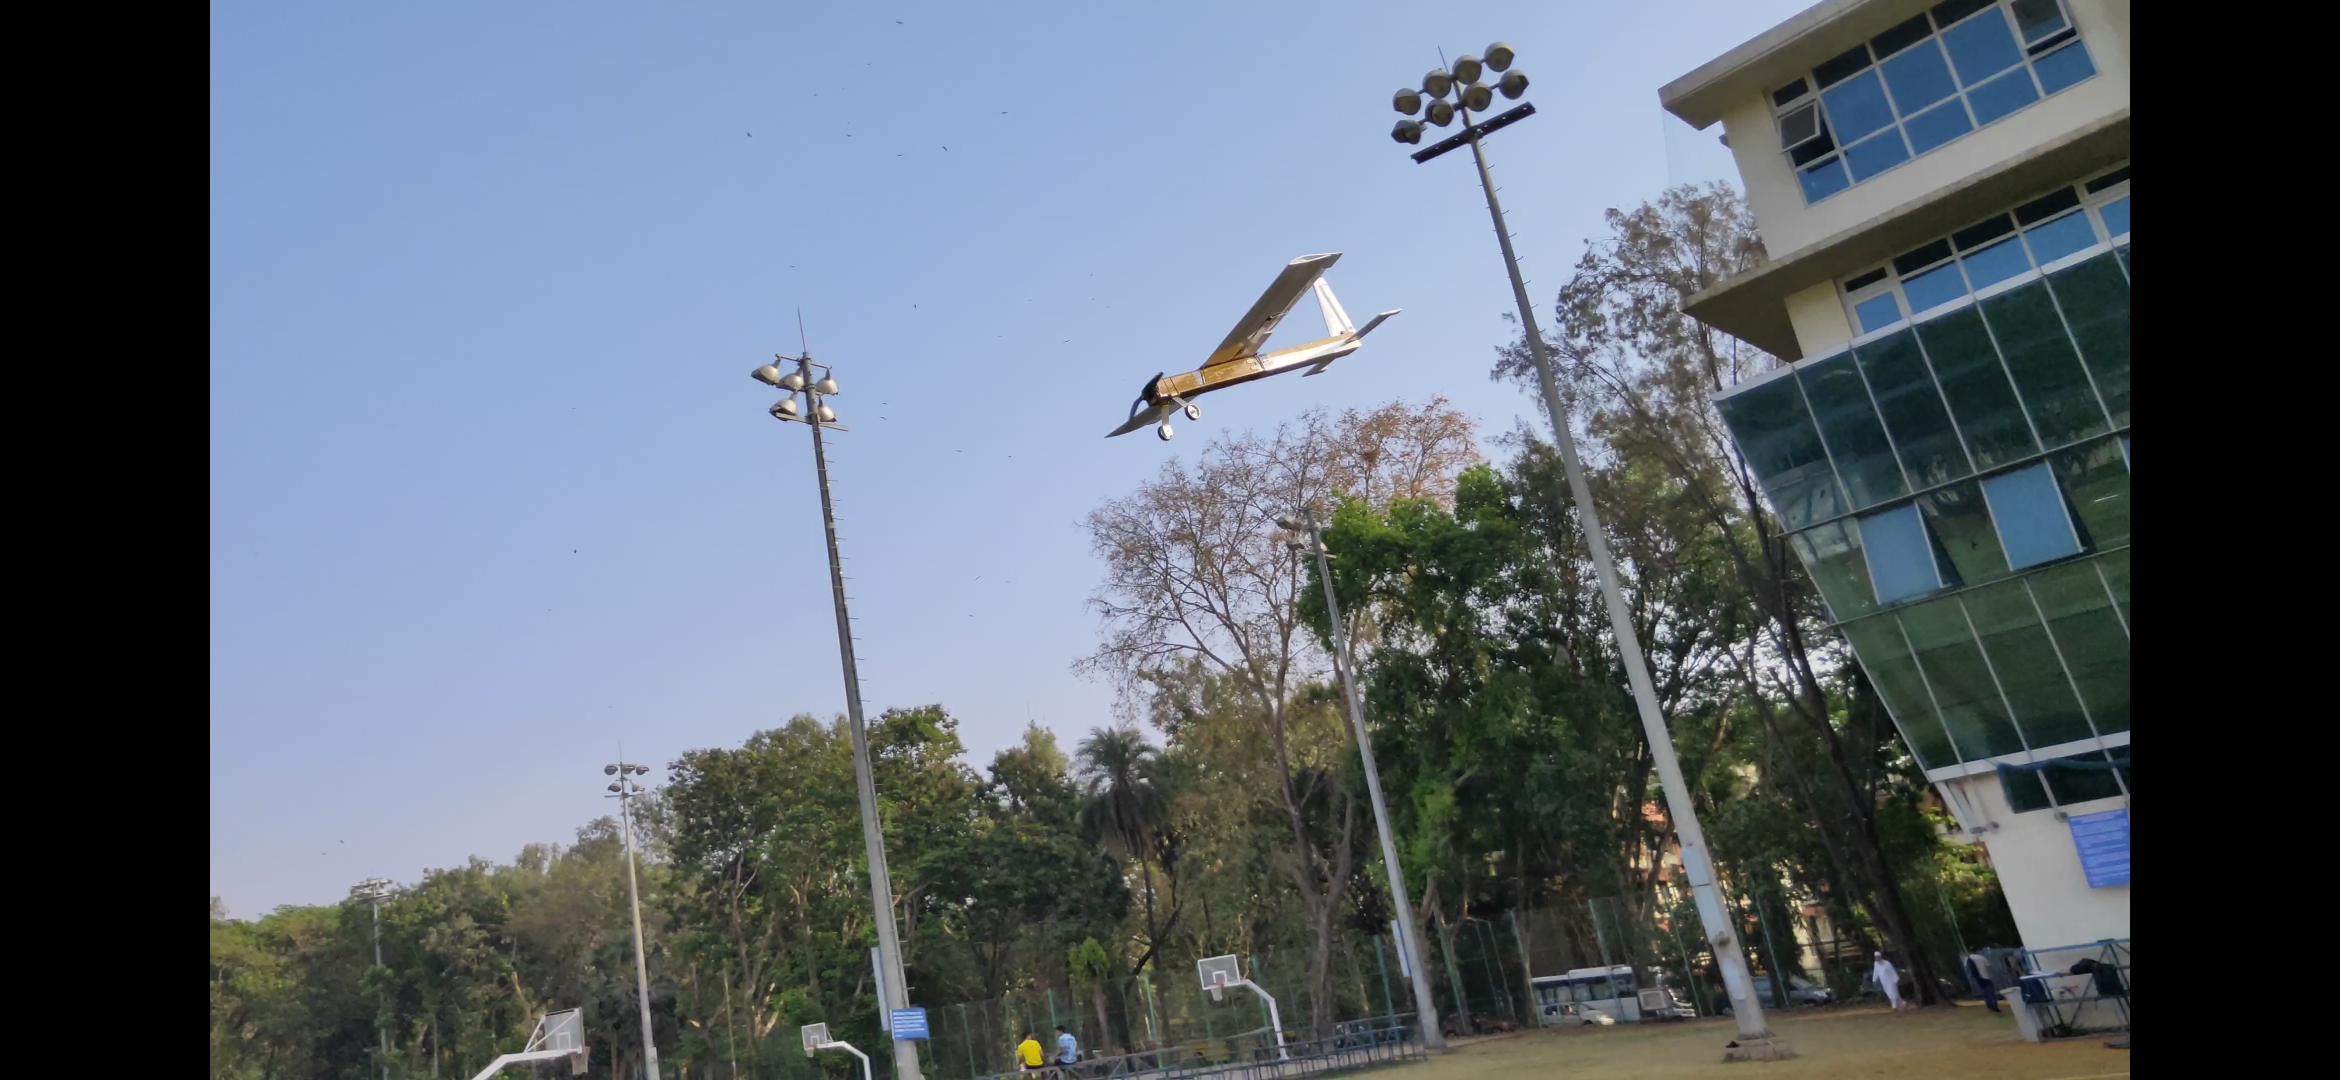 Autonomous landing of the heavy duty plane with 2m wingspan developed by team Aerove for the Barcelona Smart Drone Challenge